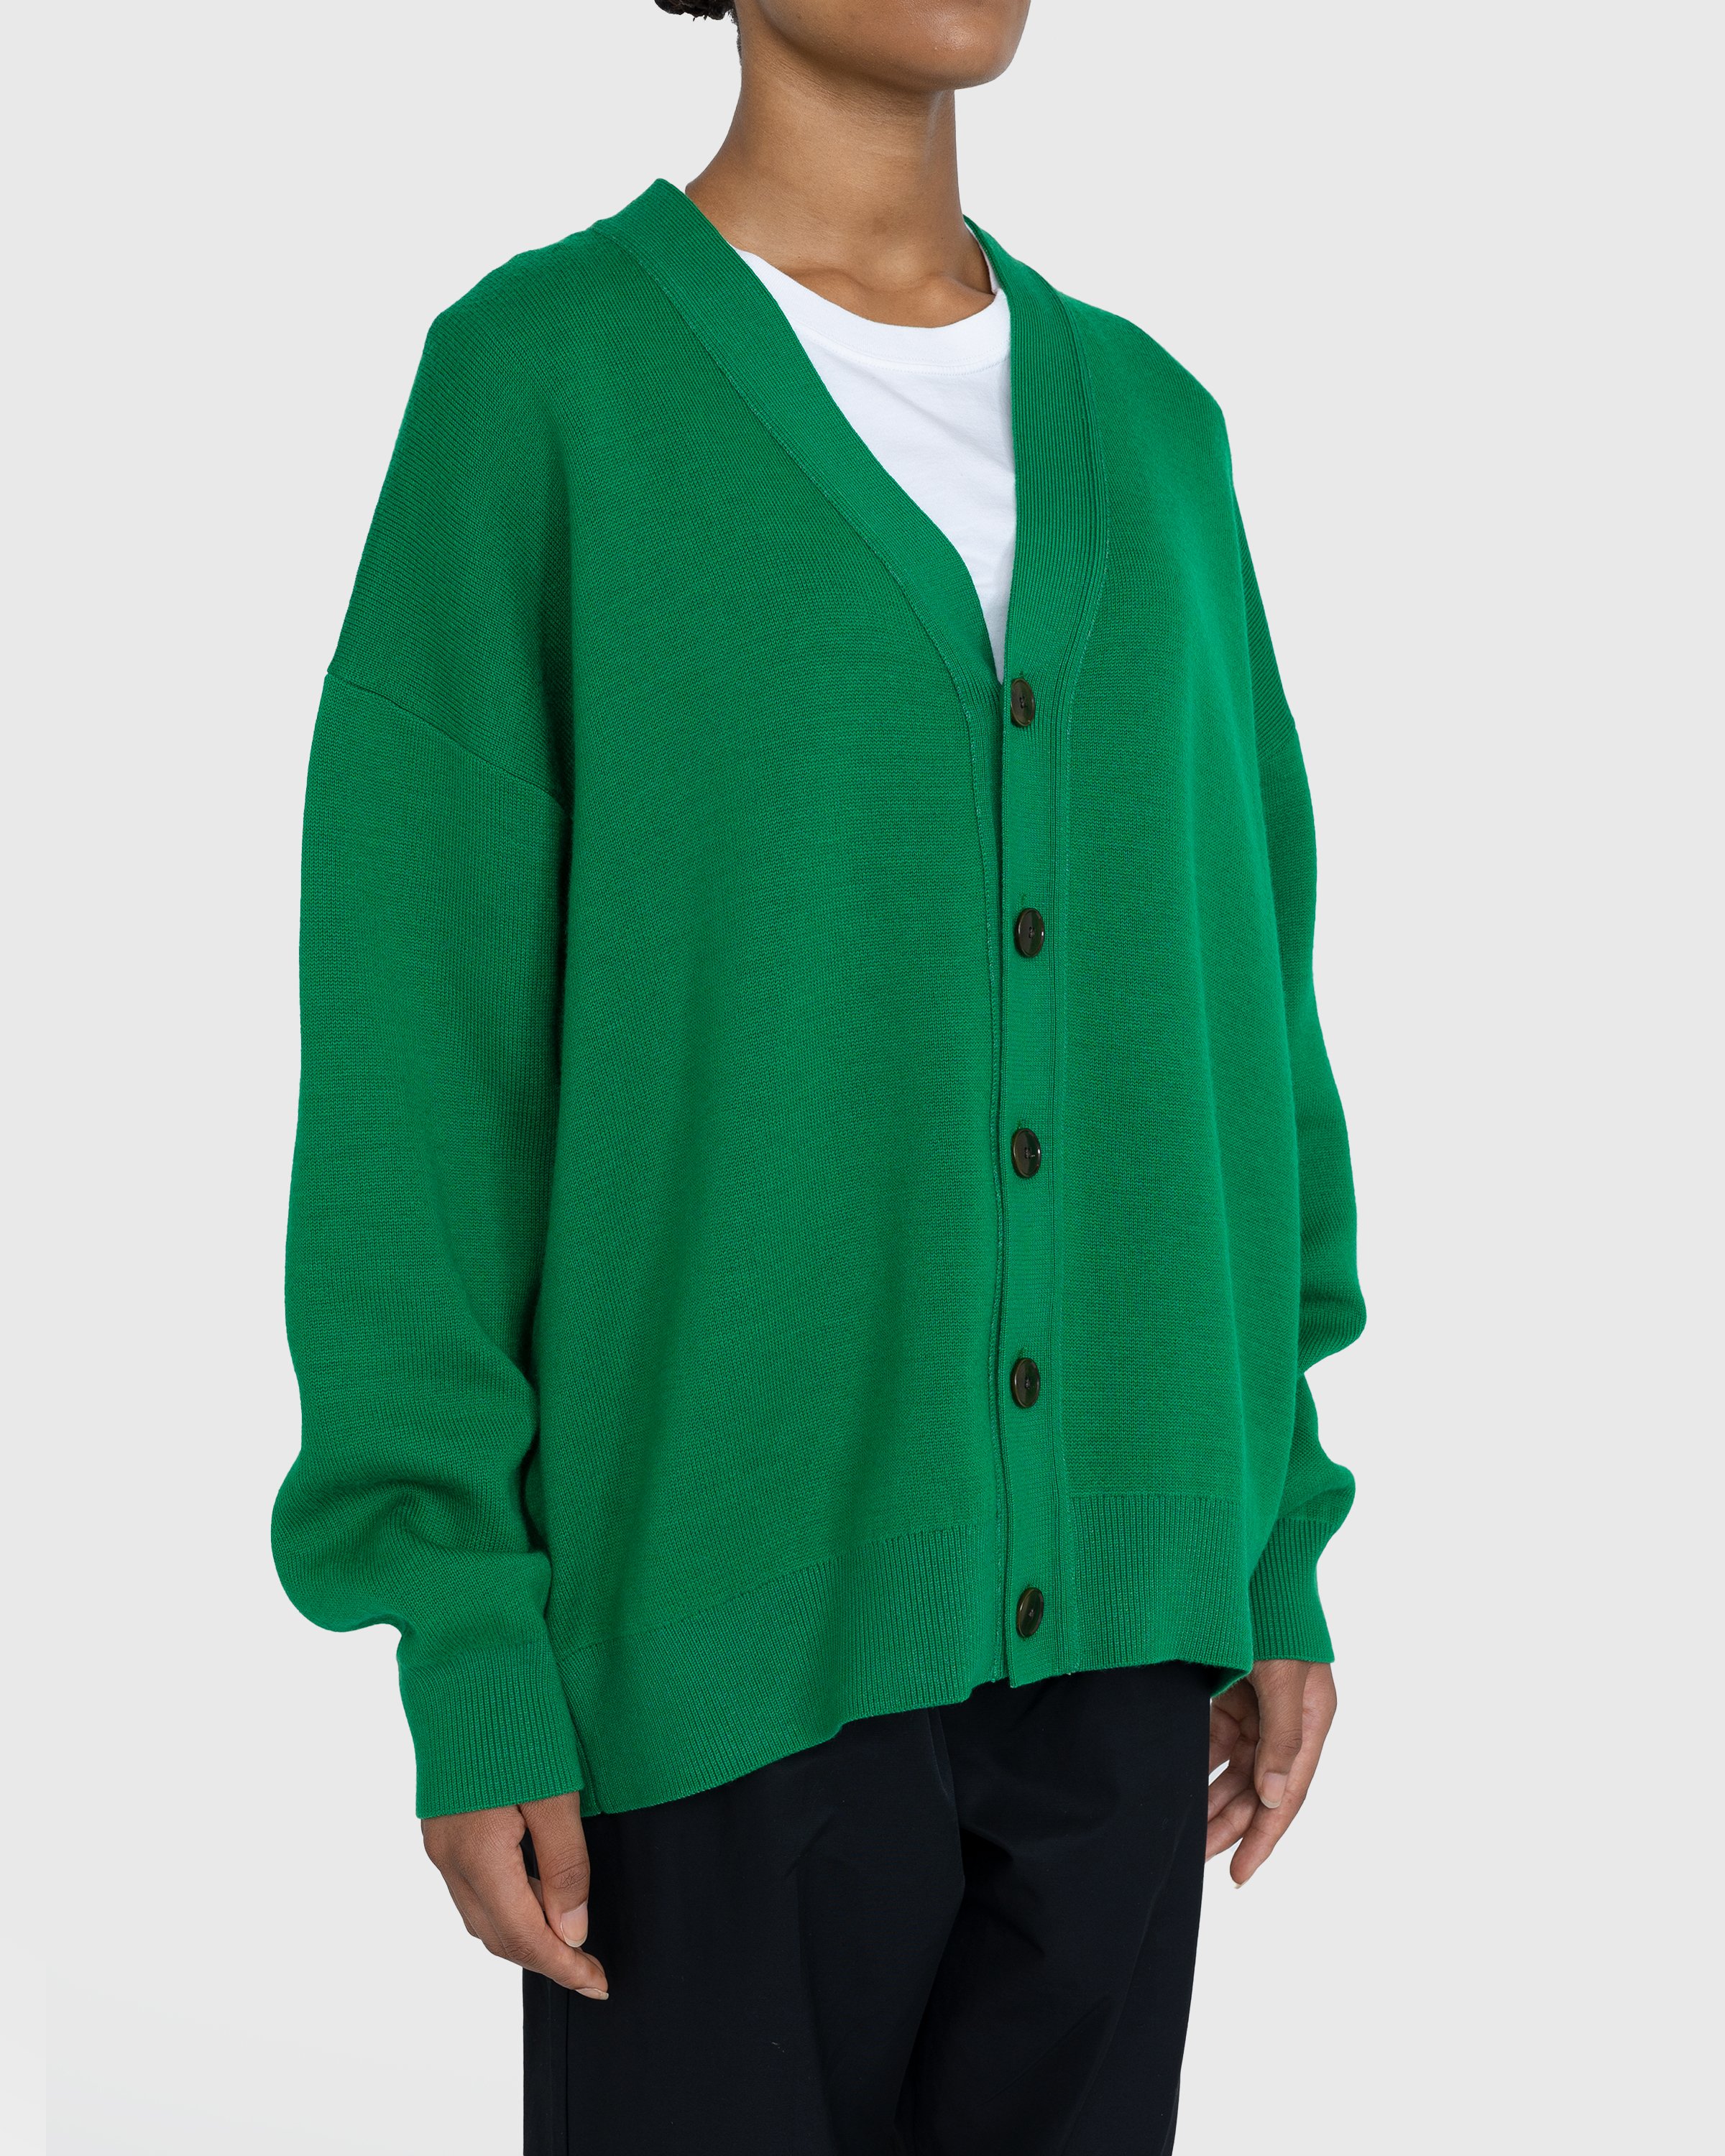 Acne Studios - Wool Blend V-Neck Cardigan Sweater Electric Green - Clothing - Green - Image 3